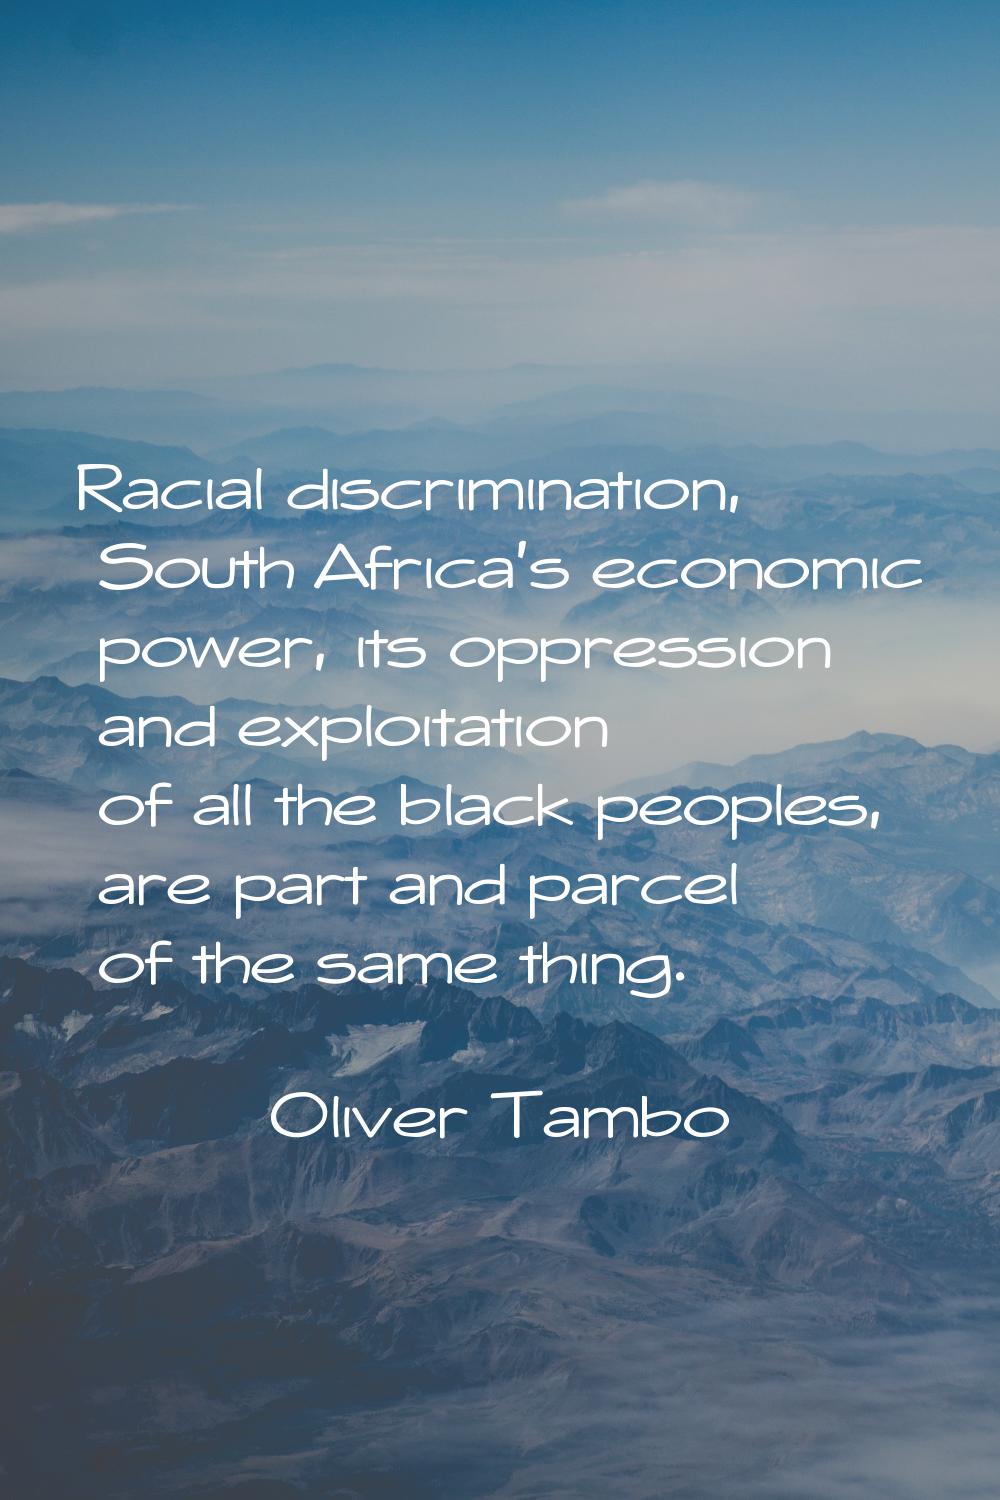 Racial discrimination, South Africa's economic power, its oppression and exploitation of all the bl